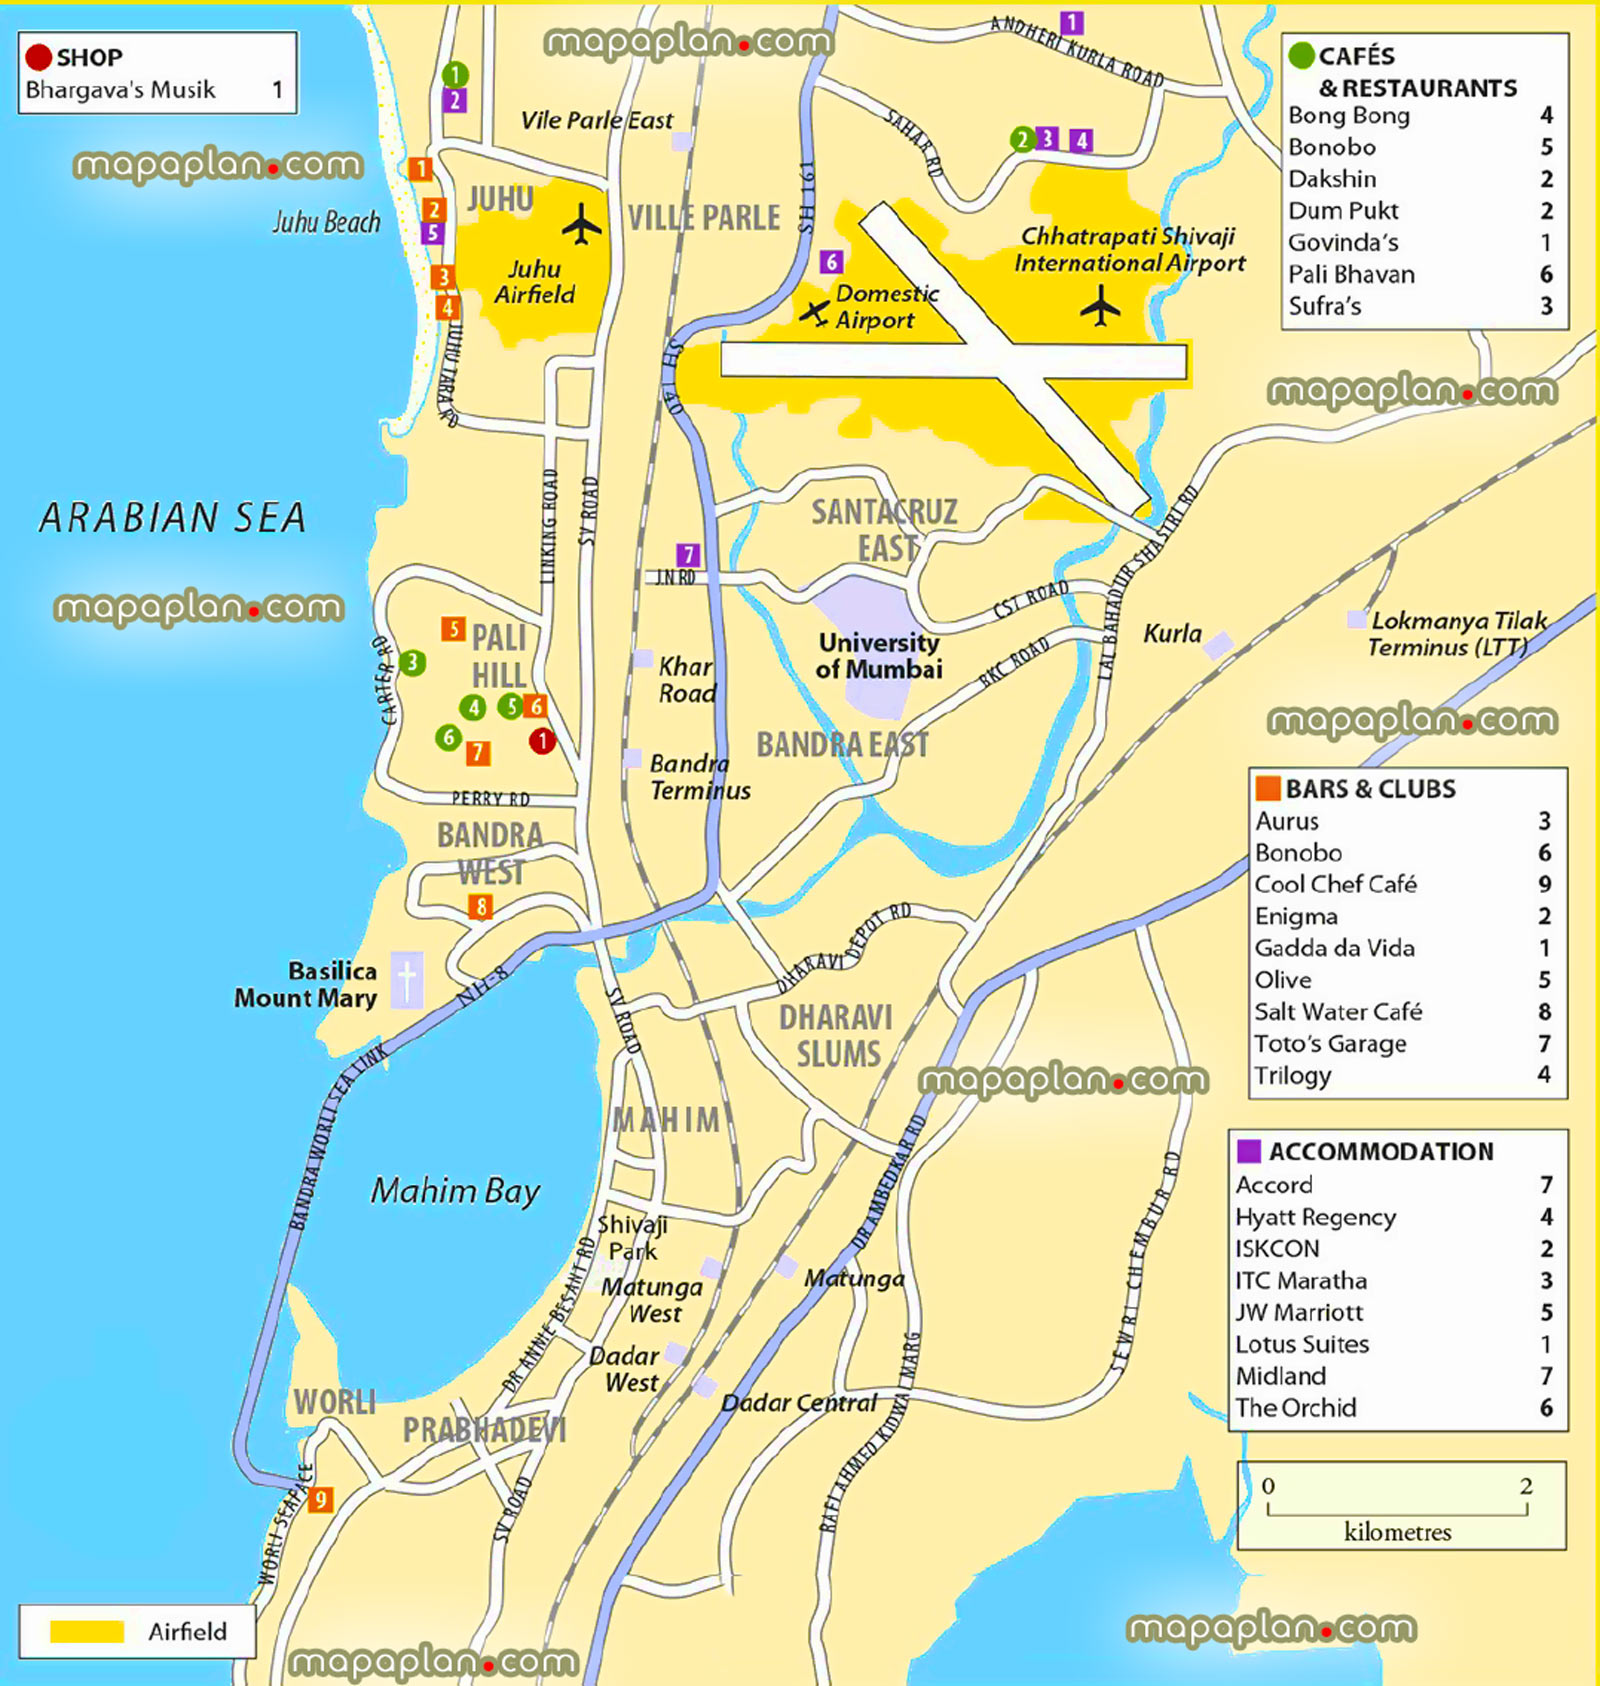 Mumbai northern suburbs visitors detailed virtual printable guide download sightseeing tour guide itinerary planner layout best things do favourite bombay attractions points interest visit tourists directions chhatrapati shivaji airports Mumbai Top tourist attractions map